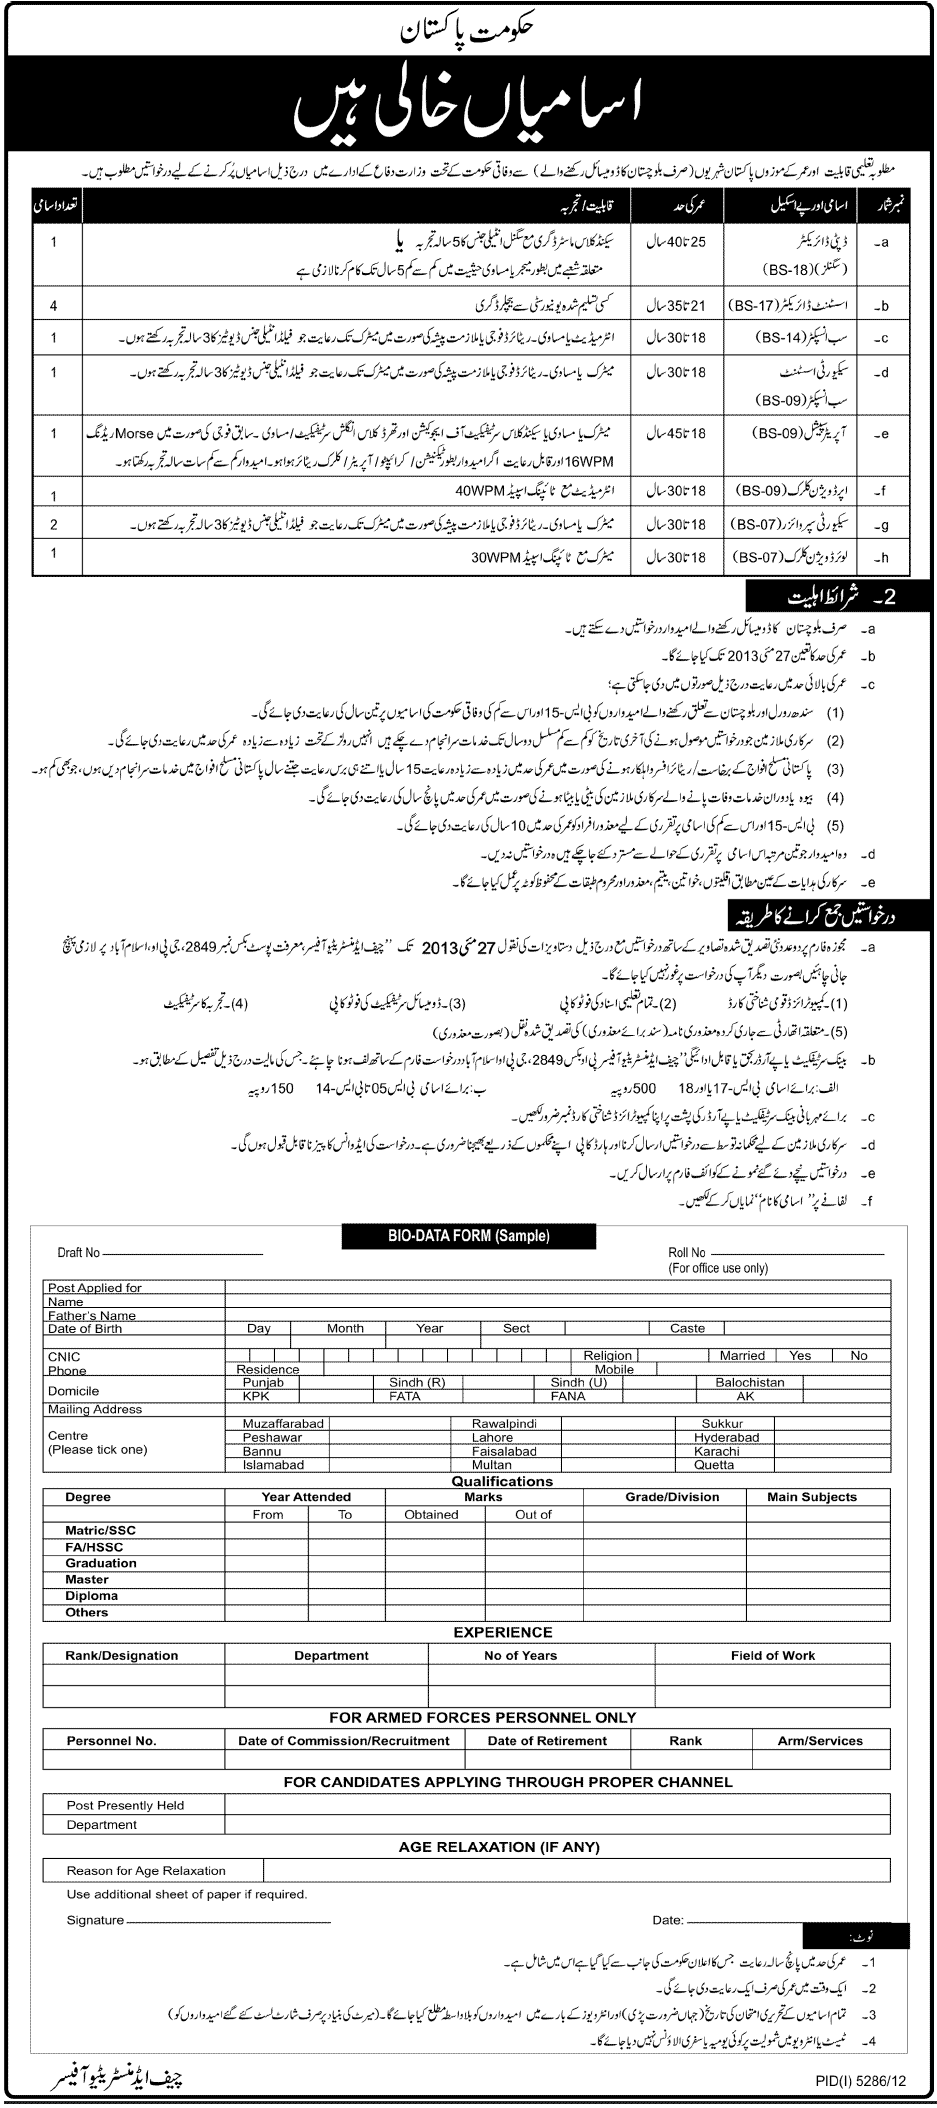 PO Box 2849 GPO Islamabad Jobs 2013 Ministry of Defence Department for Balochistan Domicile / Quota